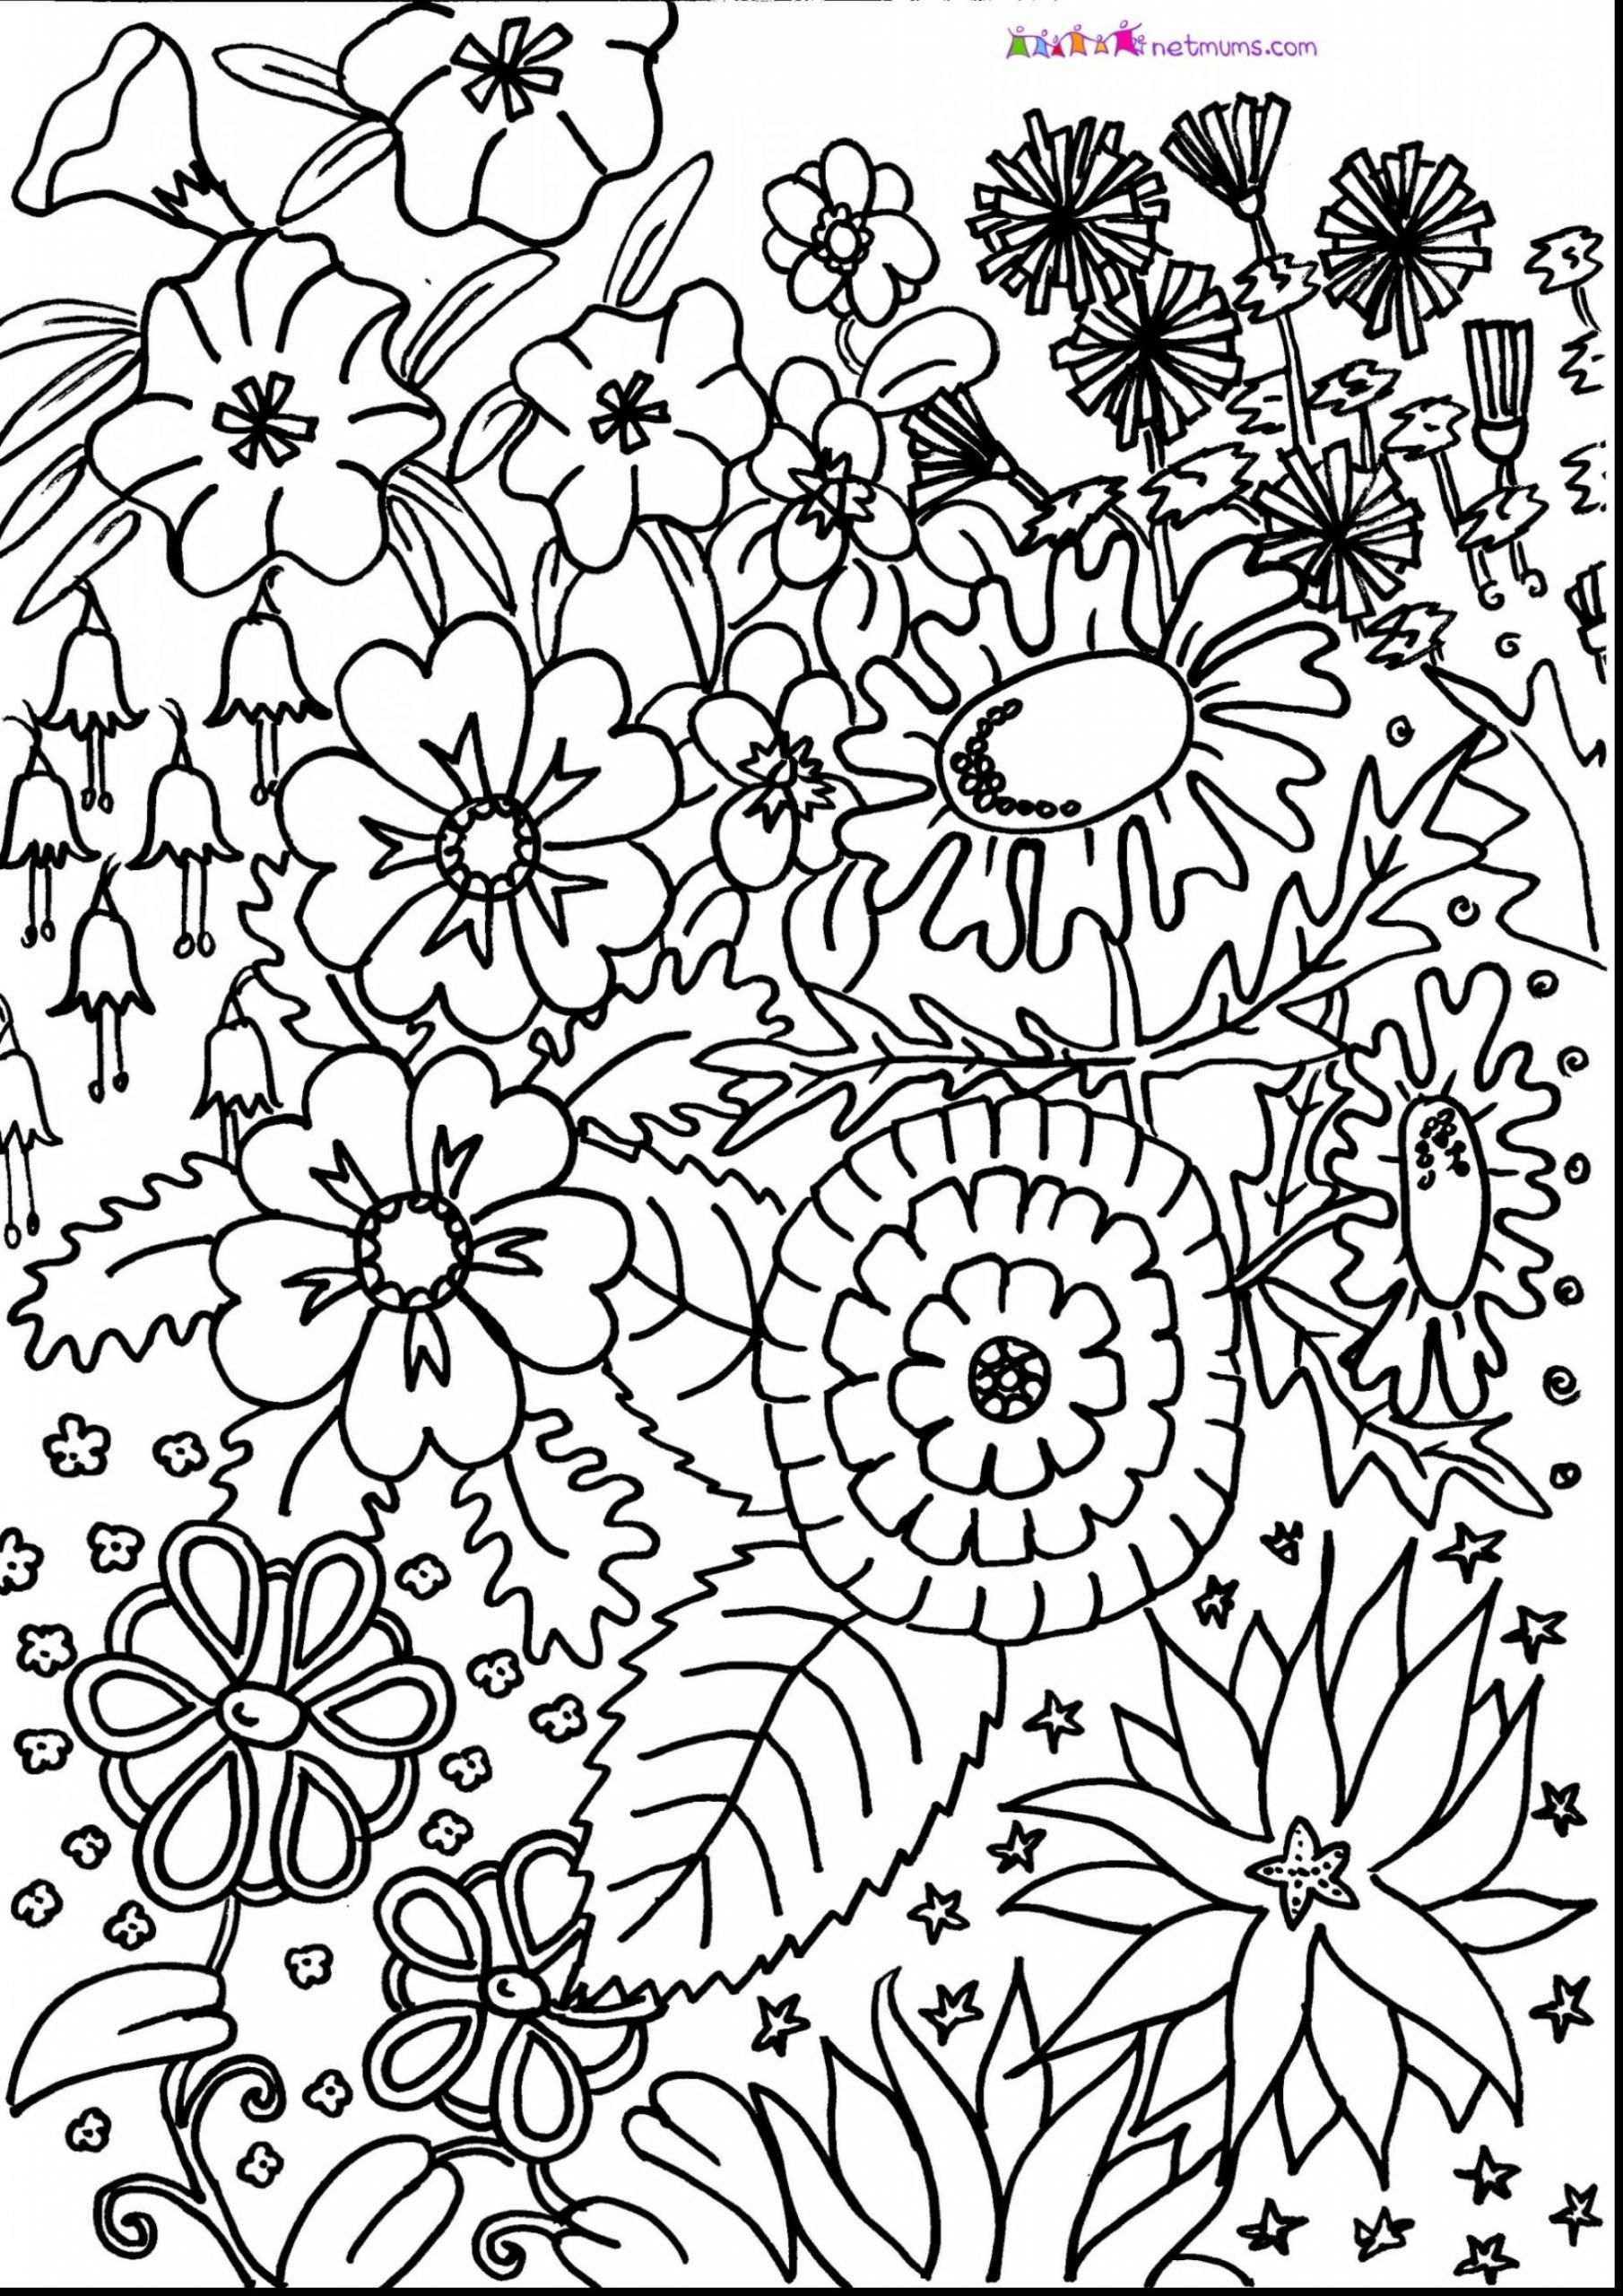 Adult Coloring Pages Patterns Flowers
 Adult Coloring Pages Patterns Flowers at GetDrawings